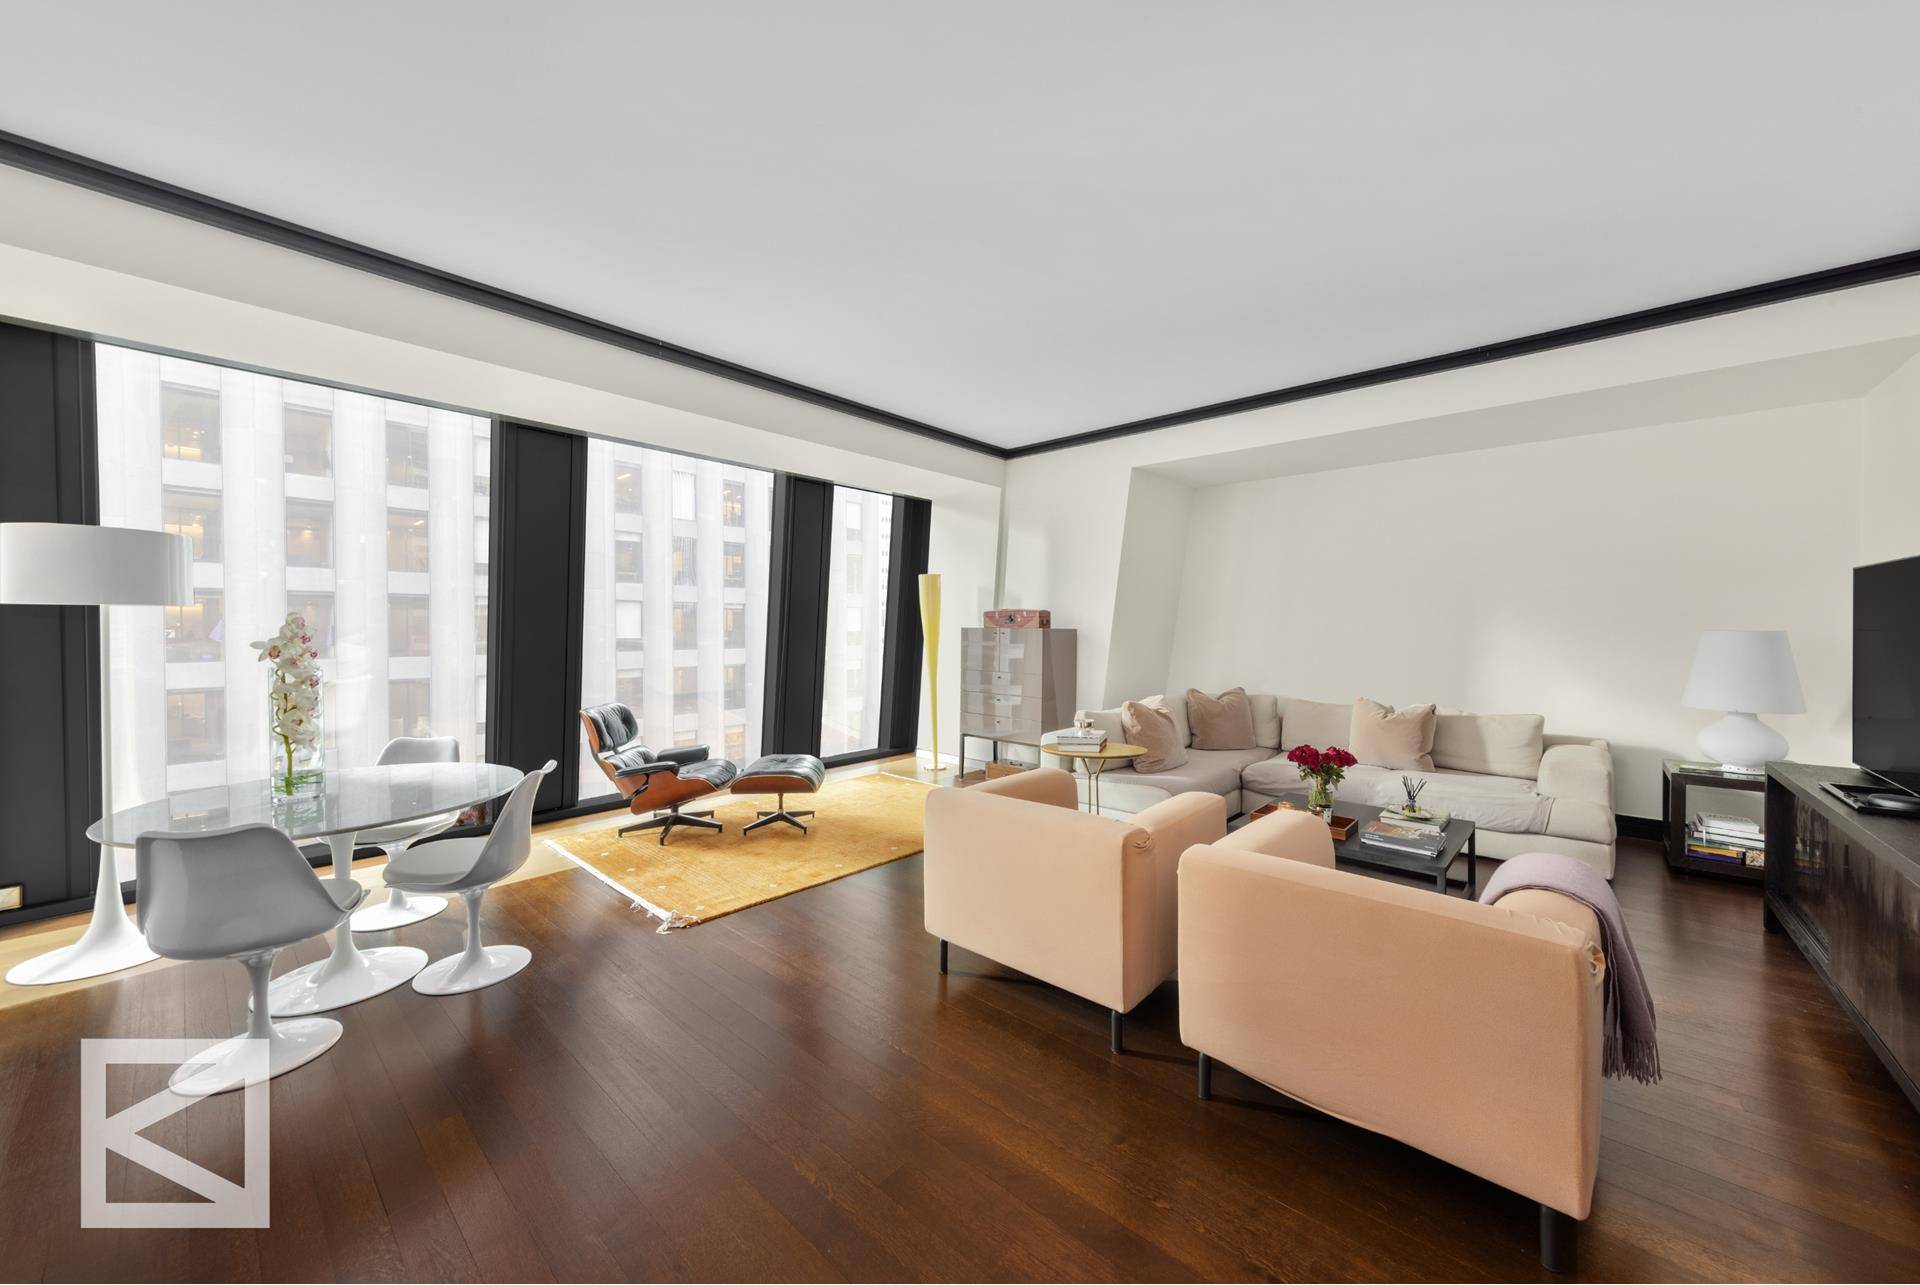 Situated in Pritzker Prize winner Jean Nouvel's 53W53, this residence offer five star hotel services in a residential condominium, in one of the most impeccably designed super tall towers in ...